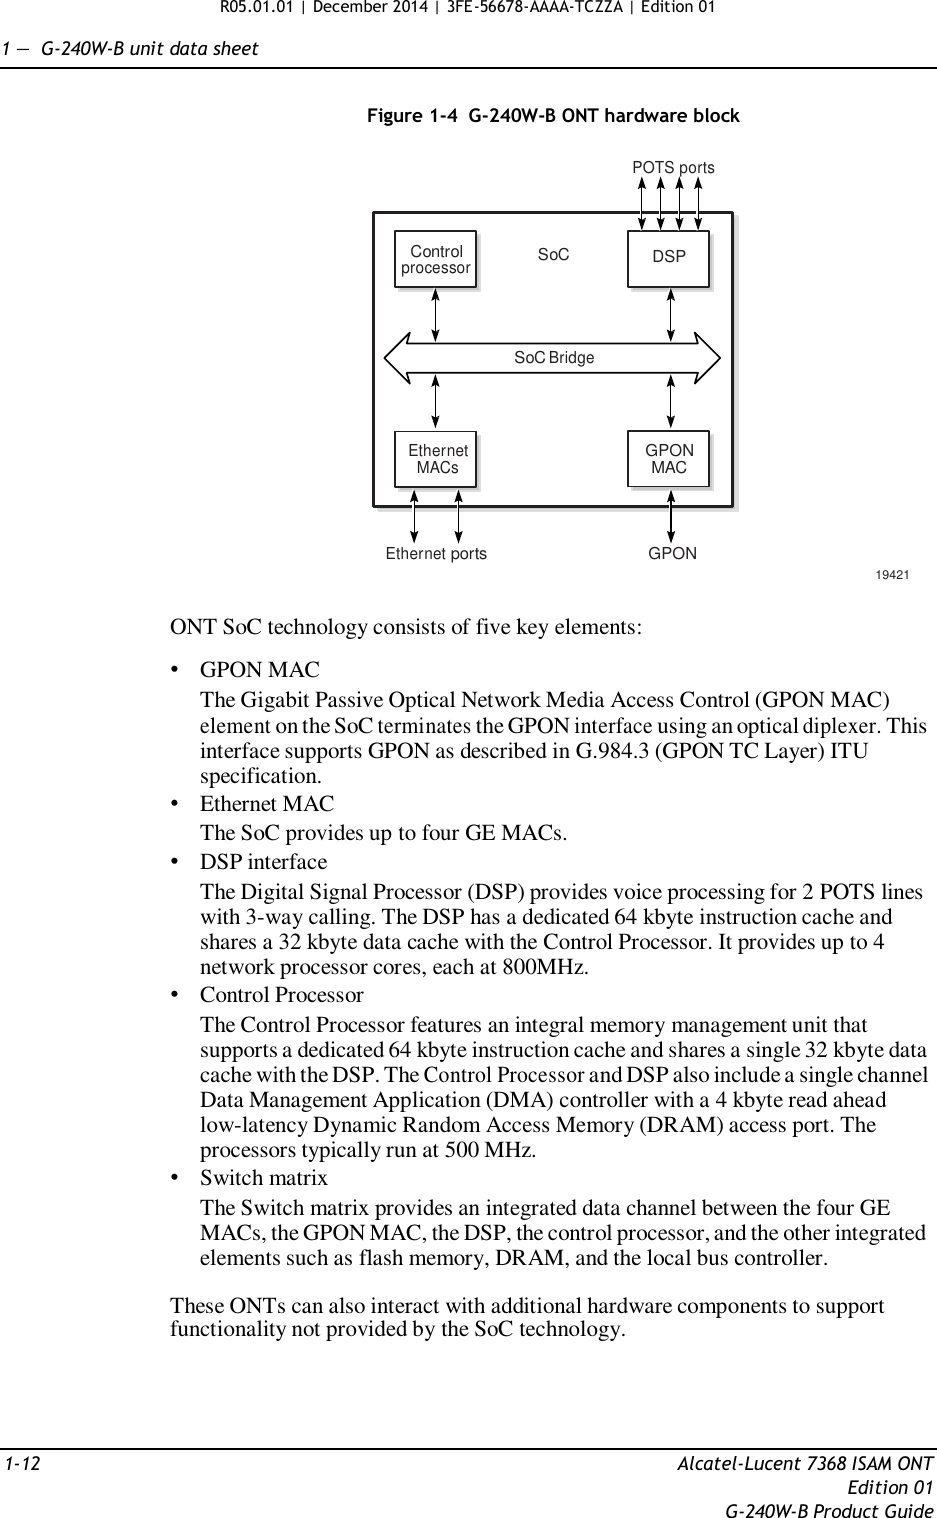 R05.01.01 | December 2014 | 3FE-56678-AAAA-TCZZA | Edition 01  1 —  G-240W-B unit data sheet   Figure 1-4  G-240W-B ONT hardware block  POTS ports    Control processor SoC DSP    SoC Bridge    Ethernet MACs GPON MAC    Ethernet ports  GPON  19421  ONT SoC technology consists of five key elements:  • GPON MAC The Gigabit Passive Optical Network Media Access Control (GPON MAC) element on the SoC terminates the GPON interface using an optical diplexer. This interface supports GPON as described in G.984.3 (GPON TC Layer) ITU specification. • Ethernet MAC The SoC provides up to four GE MACs. • DSP interface The Digital Signal Processor (DSP) provides voice processing for 2 POTS lines with 3-way calling. The DSP has a dedicated 64 kbyte instruction cache and shares a 32 kbyte data cache with the Control Processor. It provides up to 4 network processor cores, each at 800MHz. • Control Processor The Control Processor features an integral memory management unit that supports a dedicated 64 kbyte instruction cache and shares a single 32 kbyte data cache with the DSP. The Control Processor and DSP also include a single channel Data Management Application (DMA) controller with a 4 kbyte read ahead low-latency Dynamic Random Access Memory (DRAM) access port. The processors typically run at 500 MHz. • Switch matrix The Switch matrix provides an integrated data channel between the four GE MACs, the GPON MAC, the DSP, the control processor, and the other integrated elements such as flash memory, DRAM, and the local bus controller.  These ONTs can also interact with additional hardware components to support functionality not provided by the SoC technology.      1-12  Alcatel-Lucent 7368 ISAM ONT Edition 01 G-240W-B Product Guide 